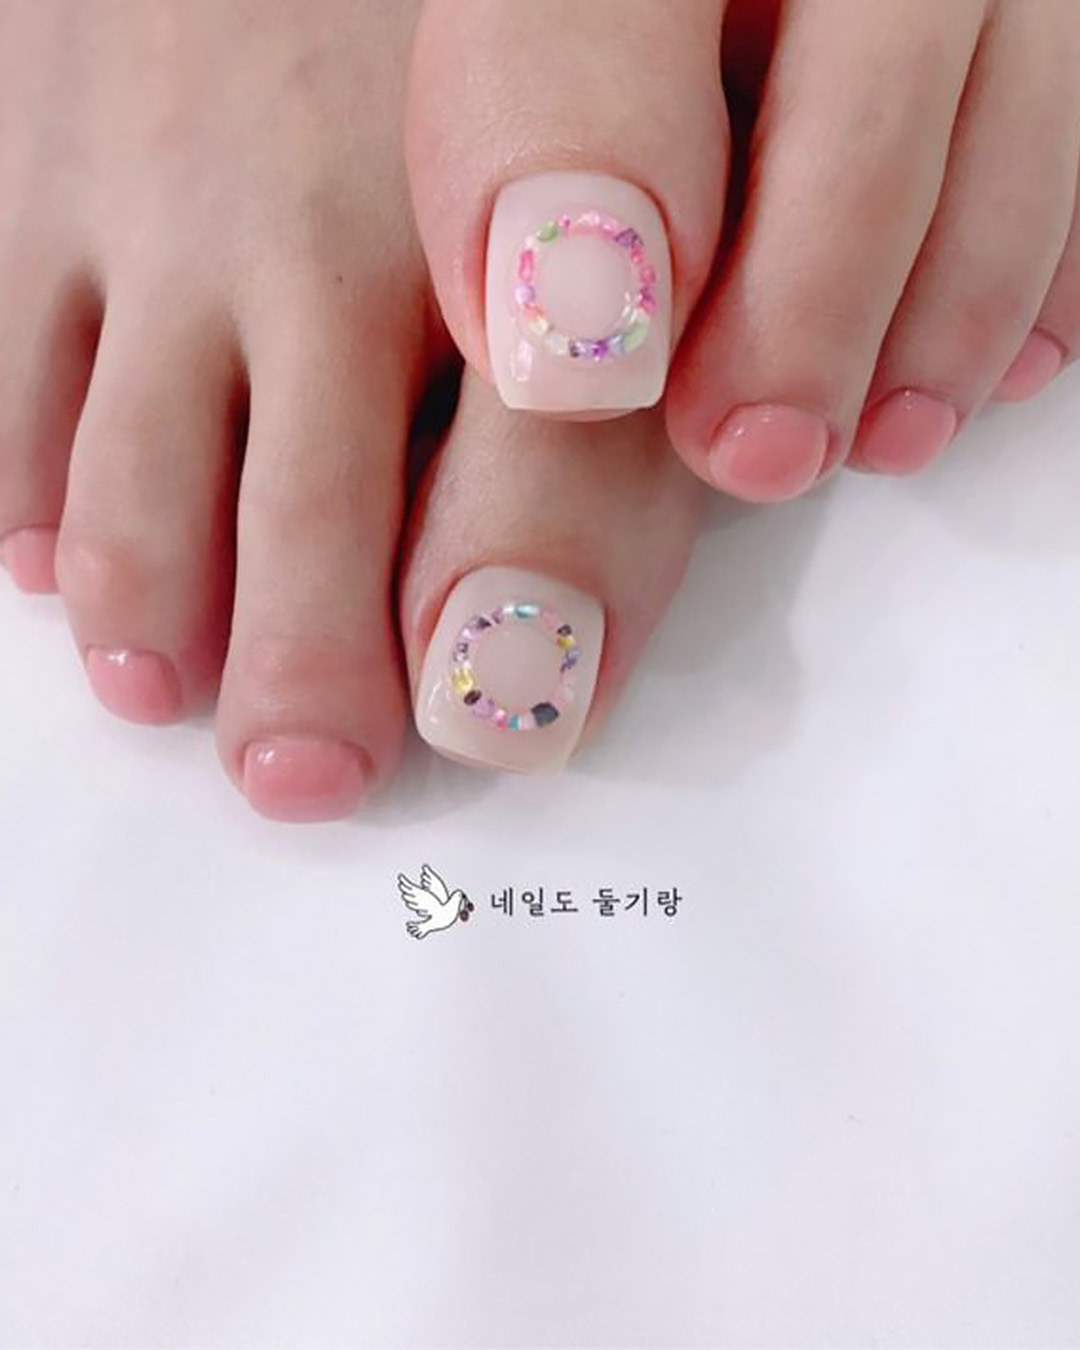 pink and white nails toe design for wedding doolginail